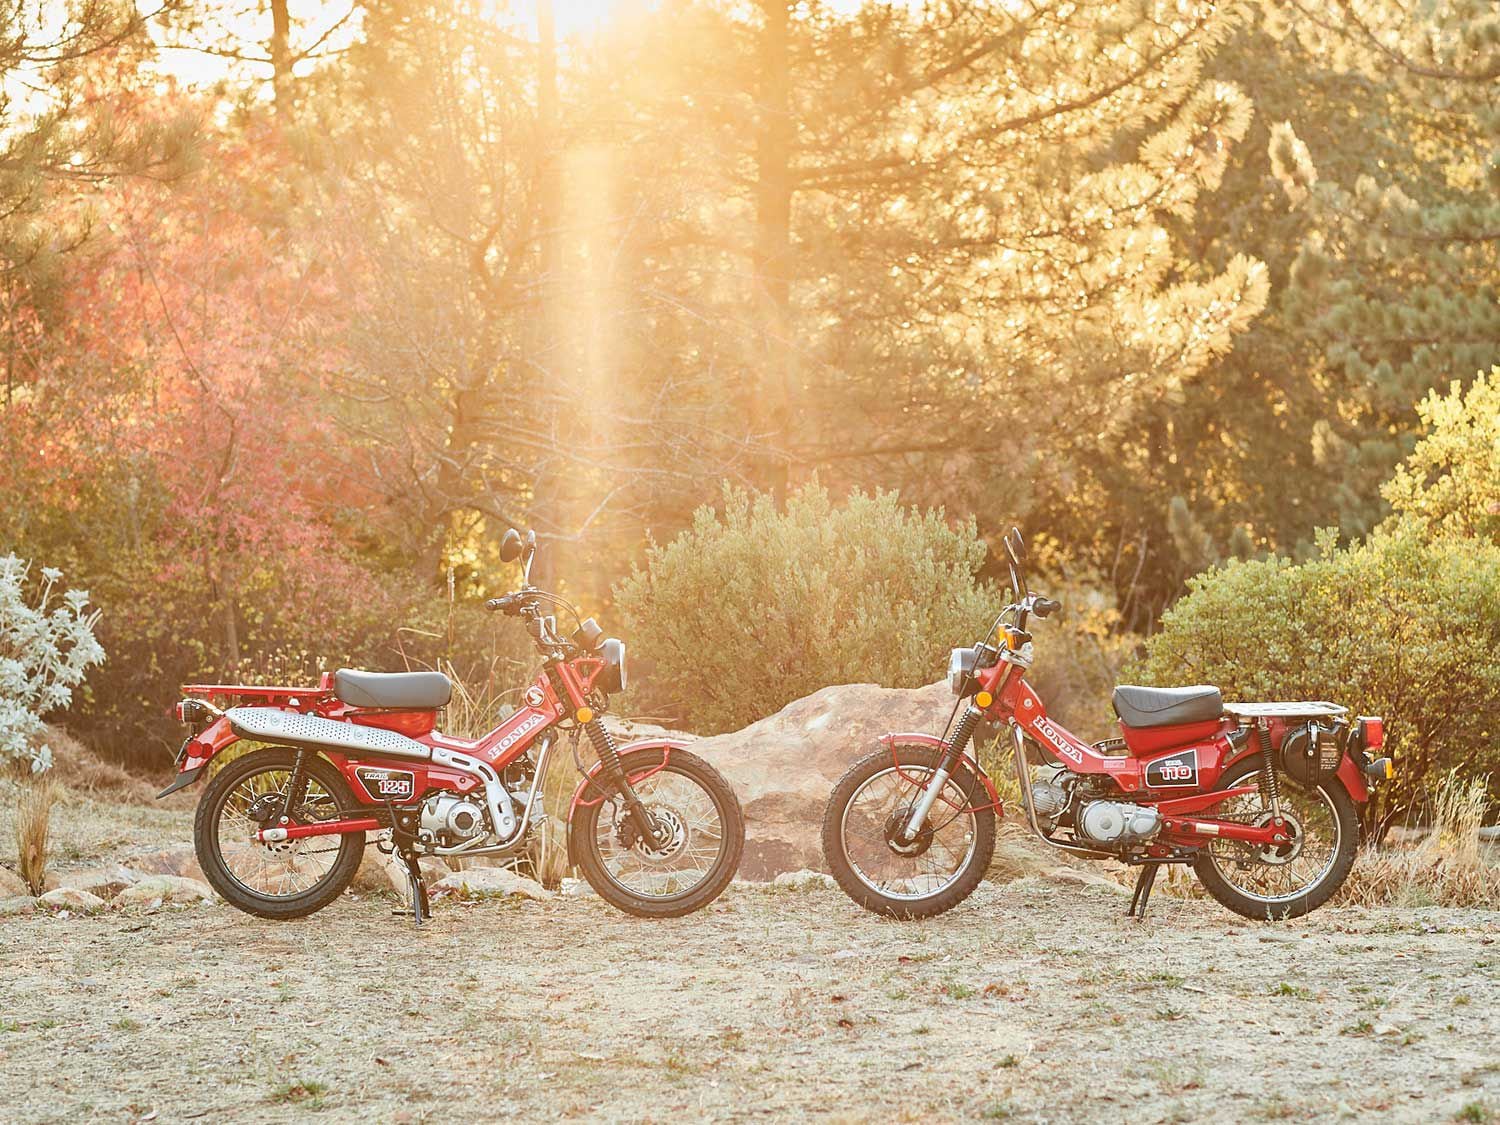 Modern technology meets classic design. Park a Trail 125 (left) beside its predecessor, a 1984 Honda Trail 110 (right), and it’s hard to spot the differences.